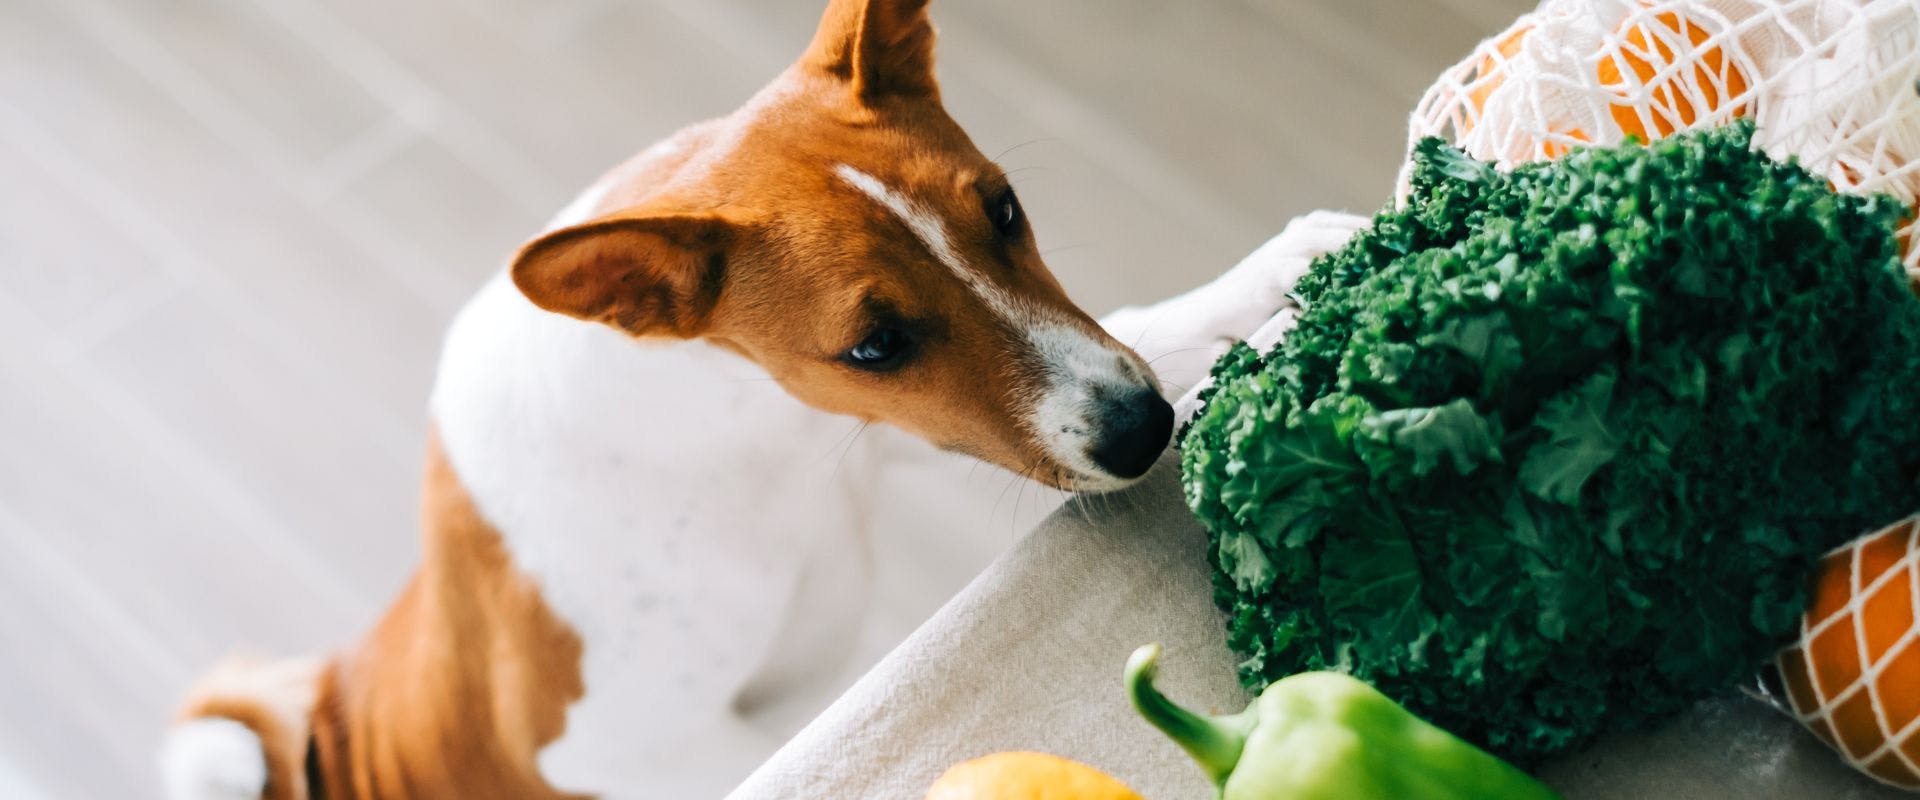 Jack Russell sniffing vegetables in kitchen